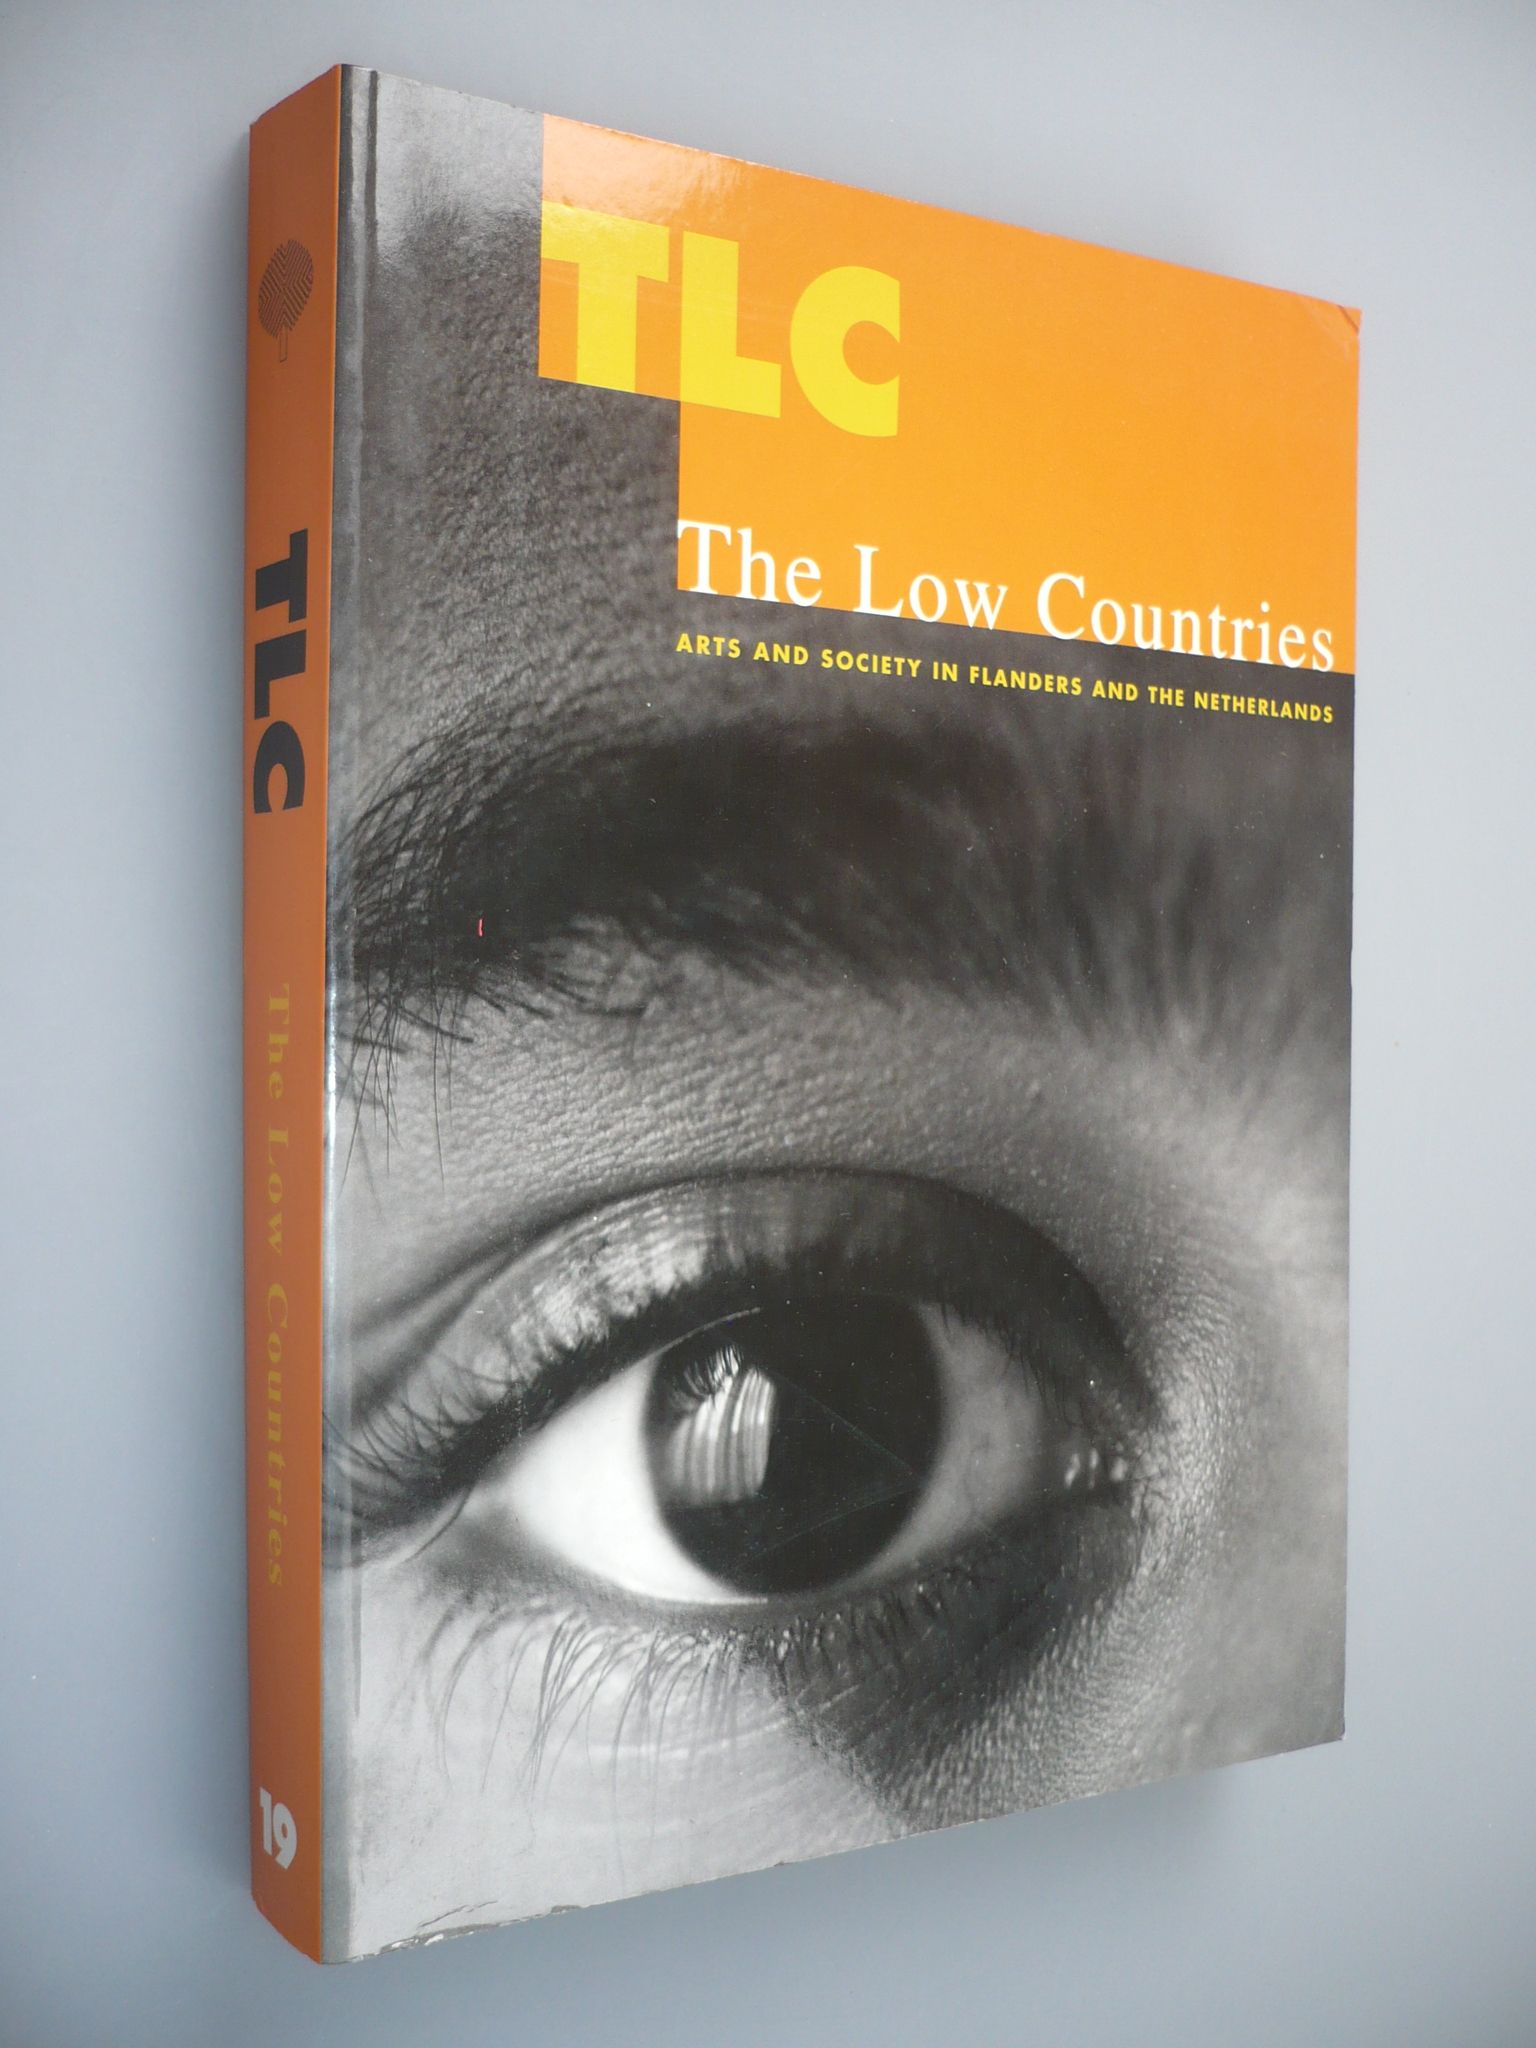 The Low Countries: Arts and Society in Flanders and the Netherlands; Volume 19 - Devoldere, Luc (ed.)